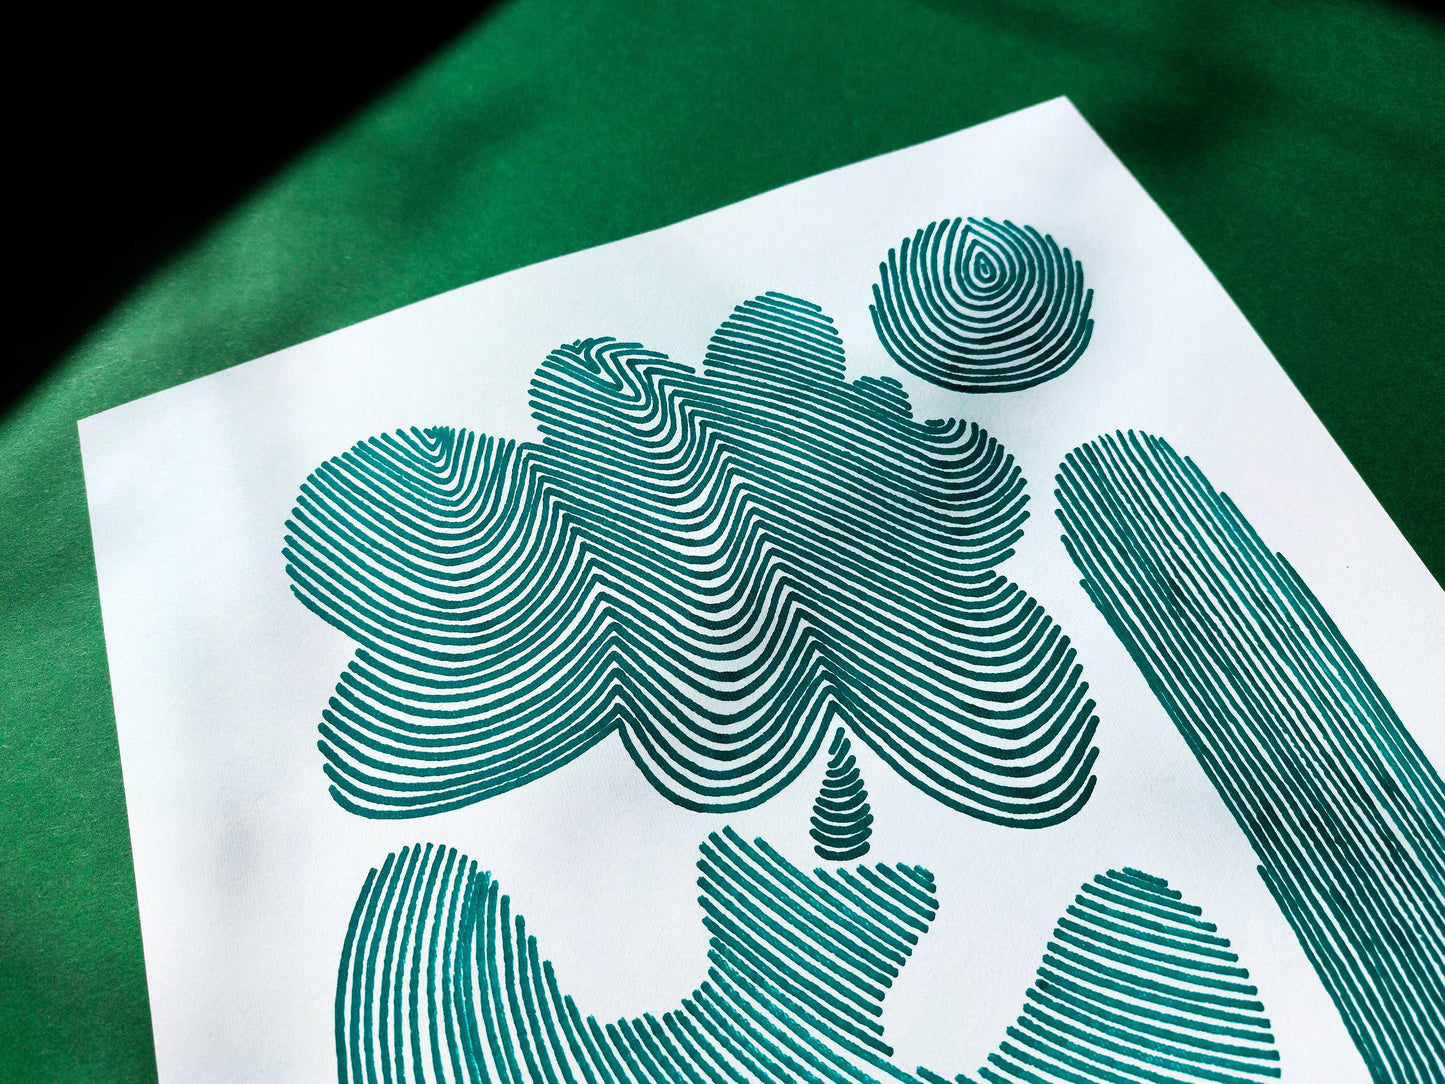 Details White and emerald green Abstract flower line drawing shapes artwork